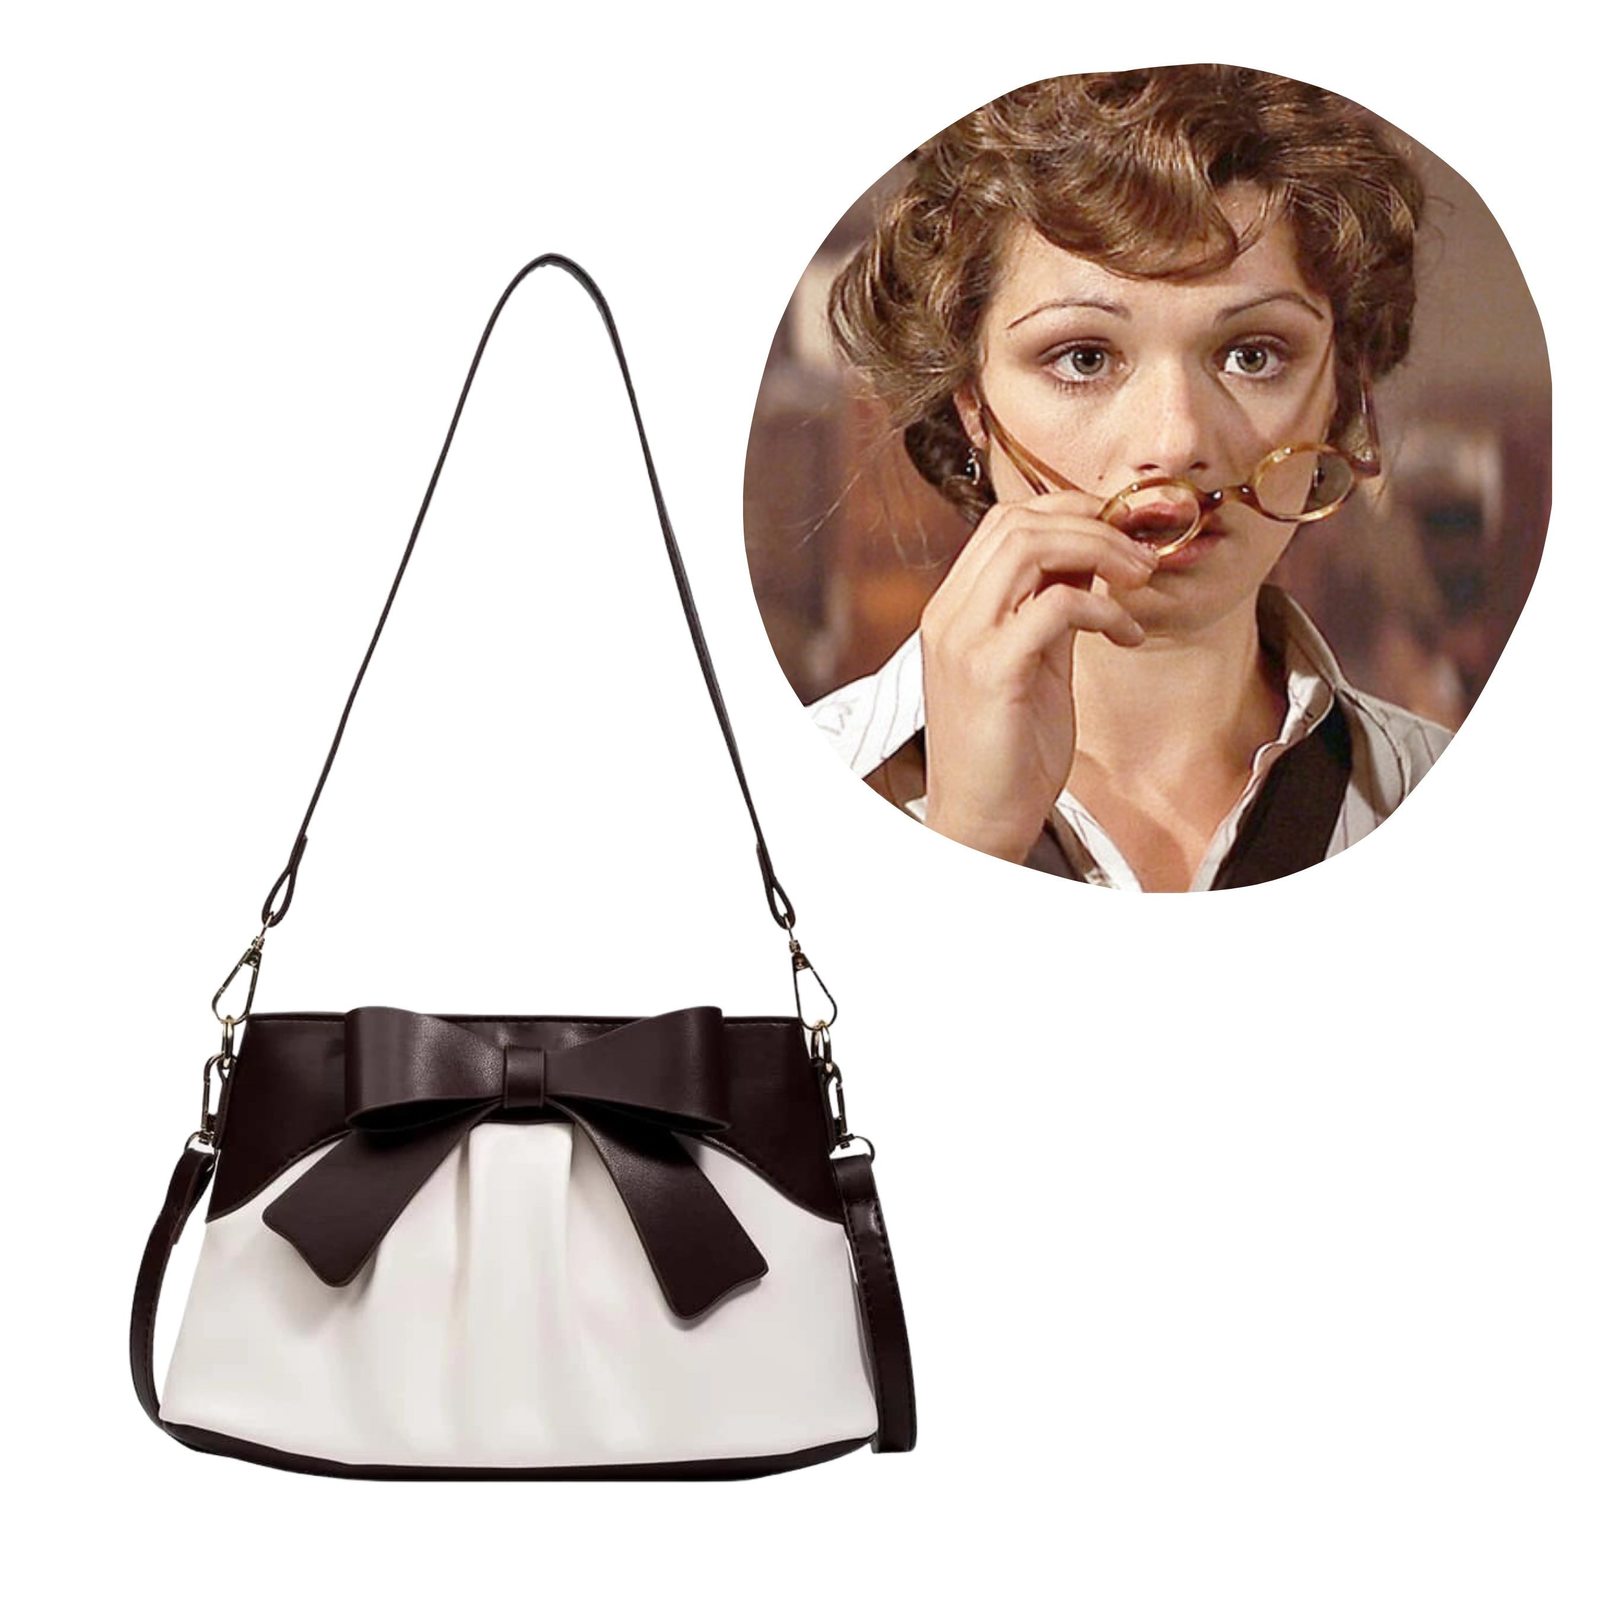 The mummy movie inspired bag Evie’s purse librarian crossbody beige bow shoulder